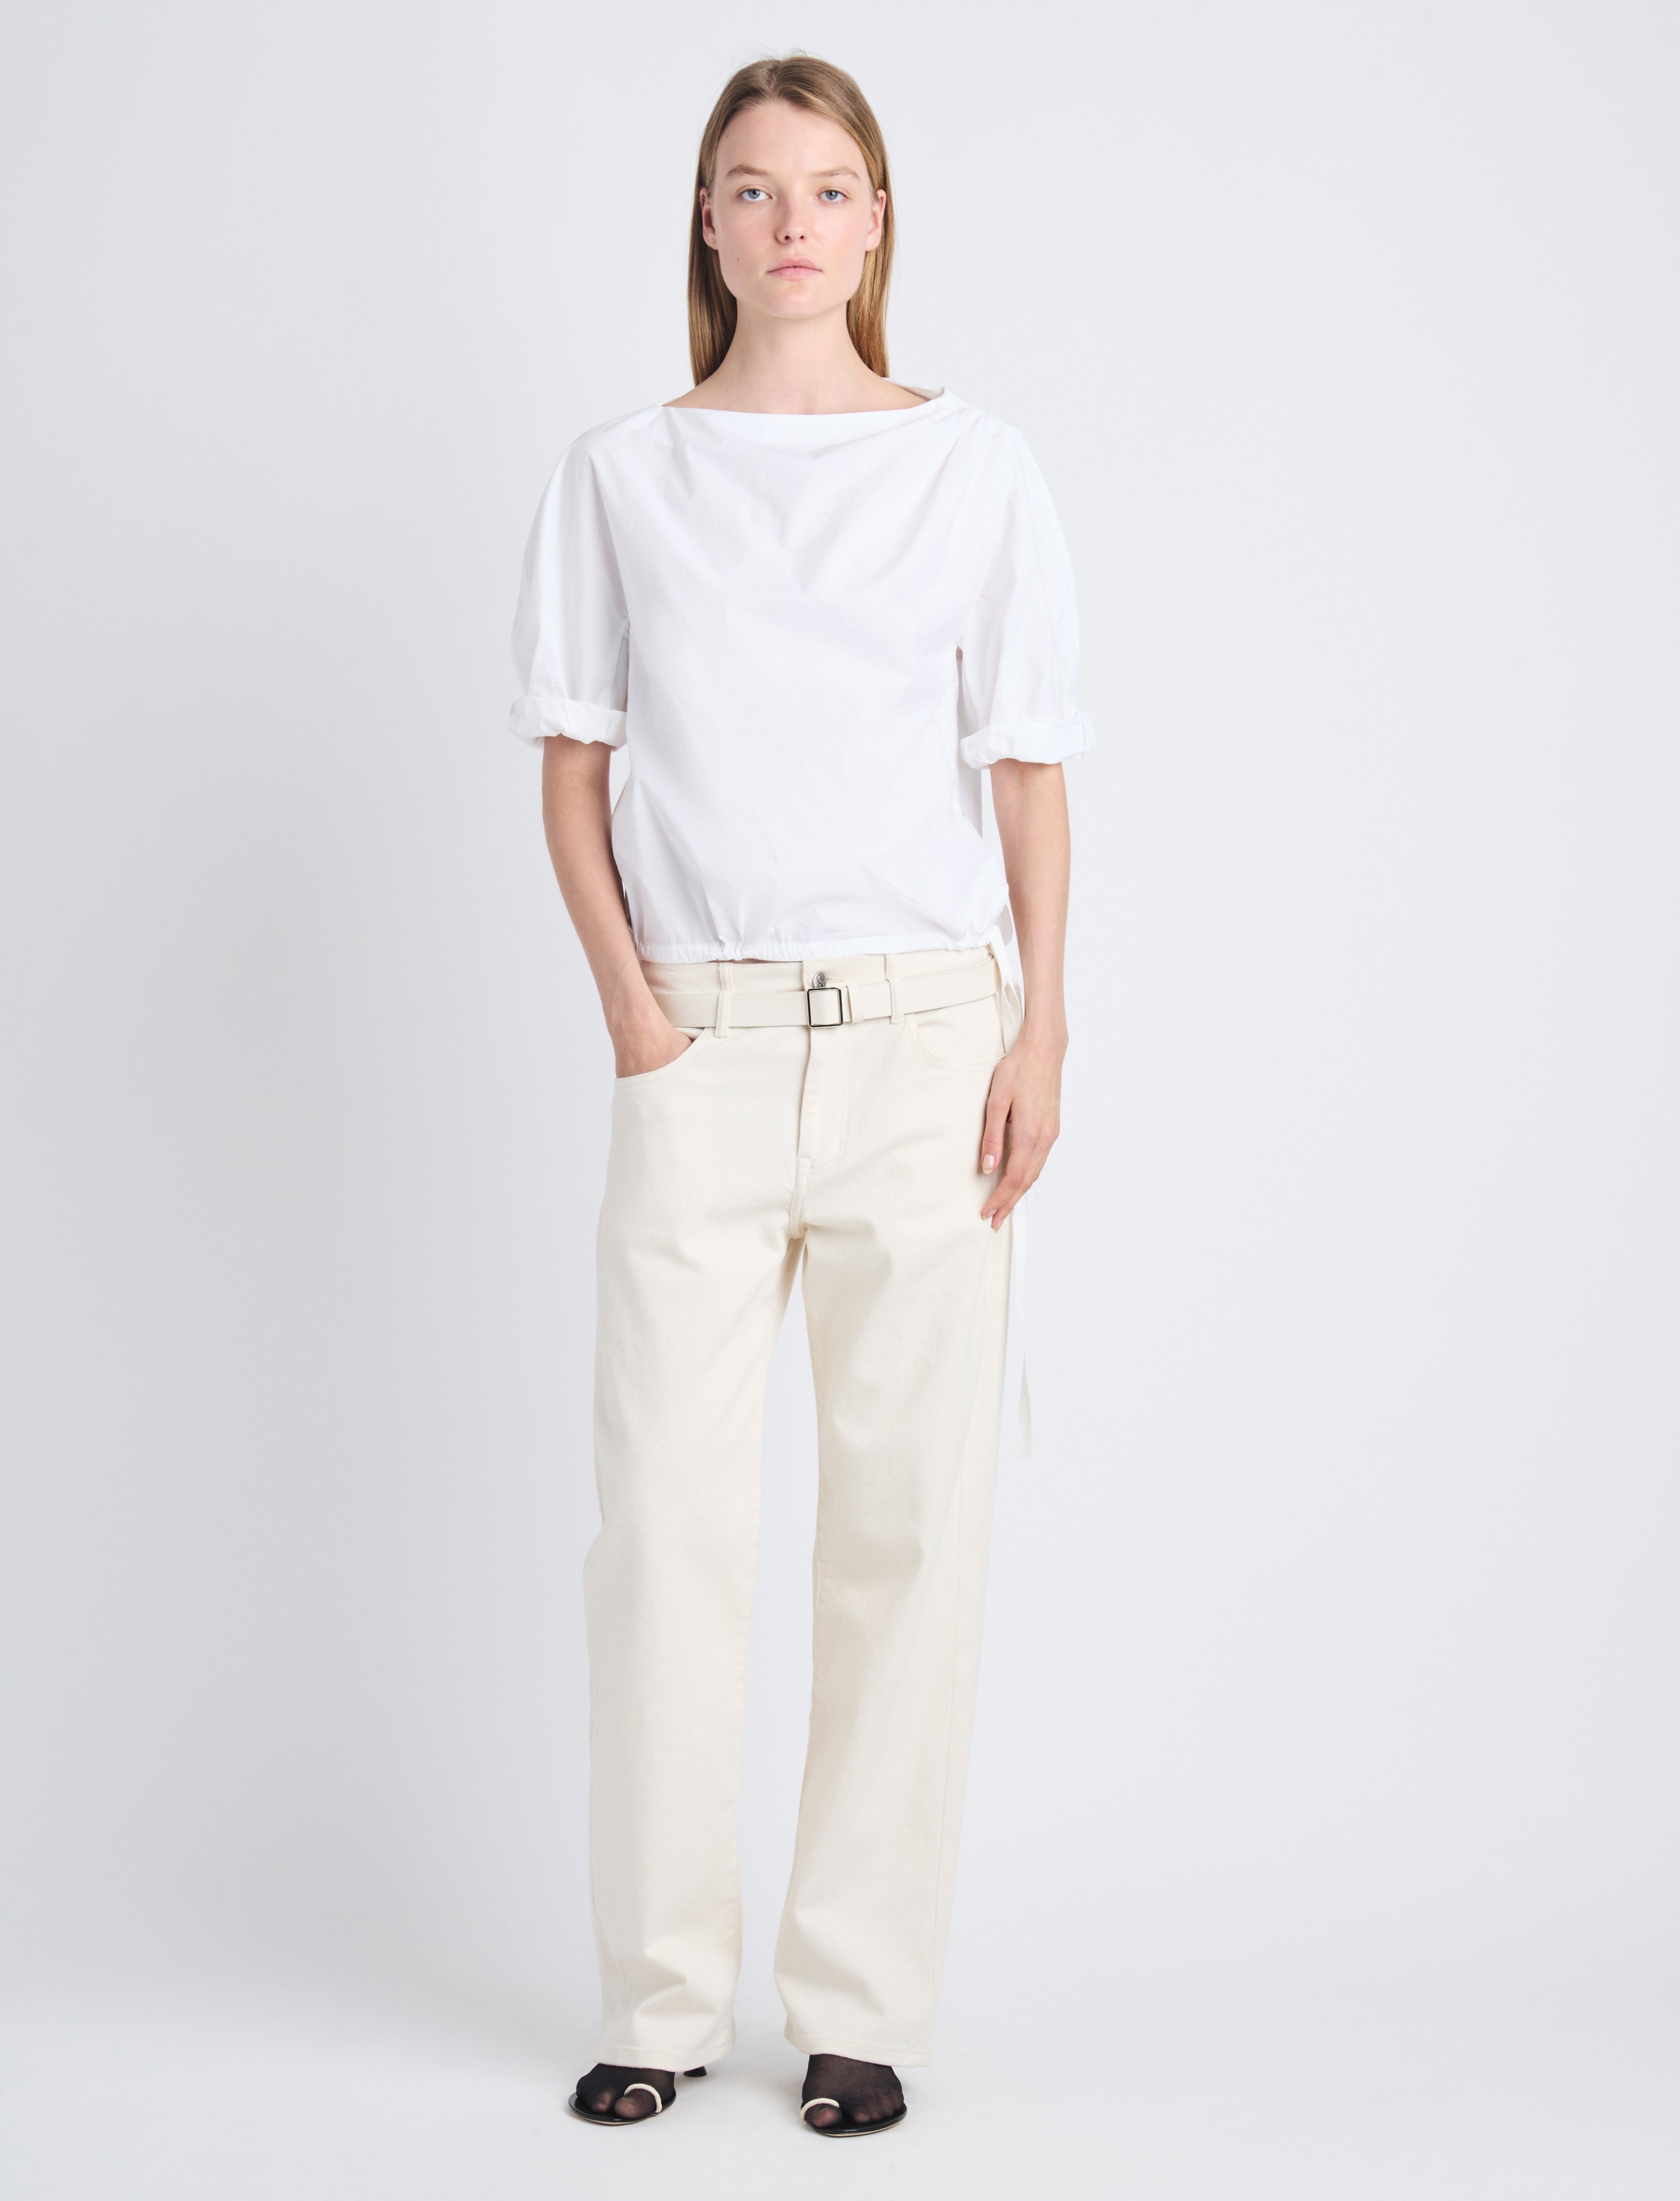 Addison Puff Sleeve Top in Washed Cotton Poplin - 3